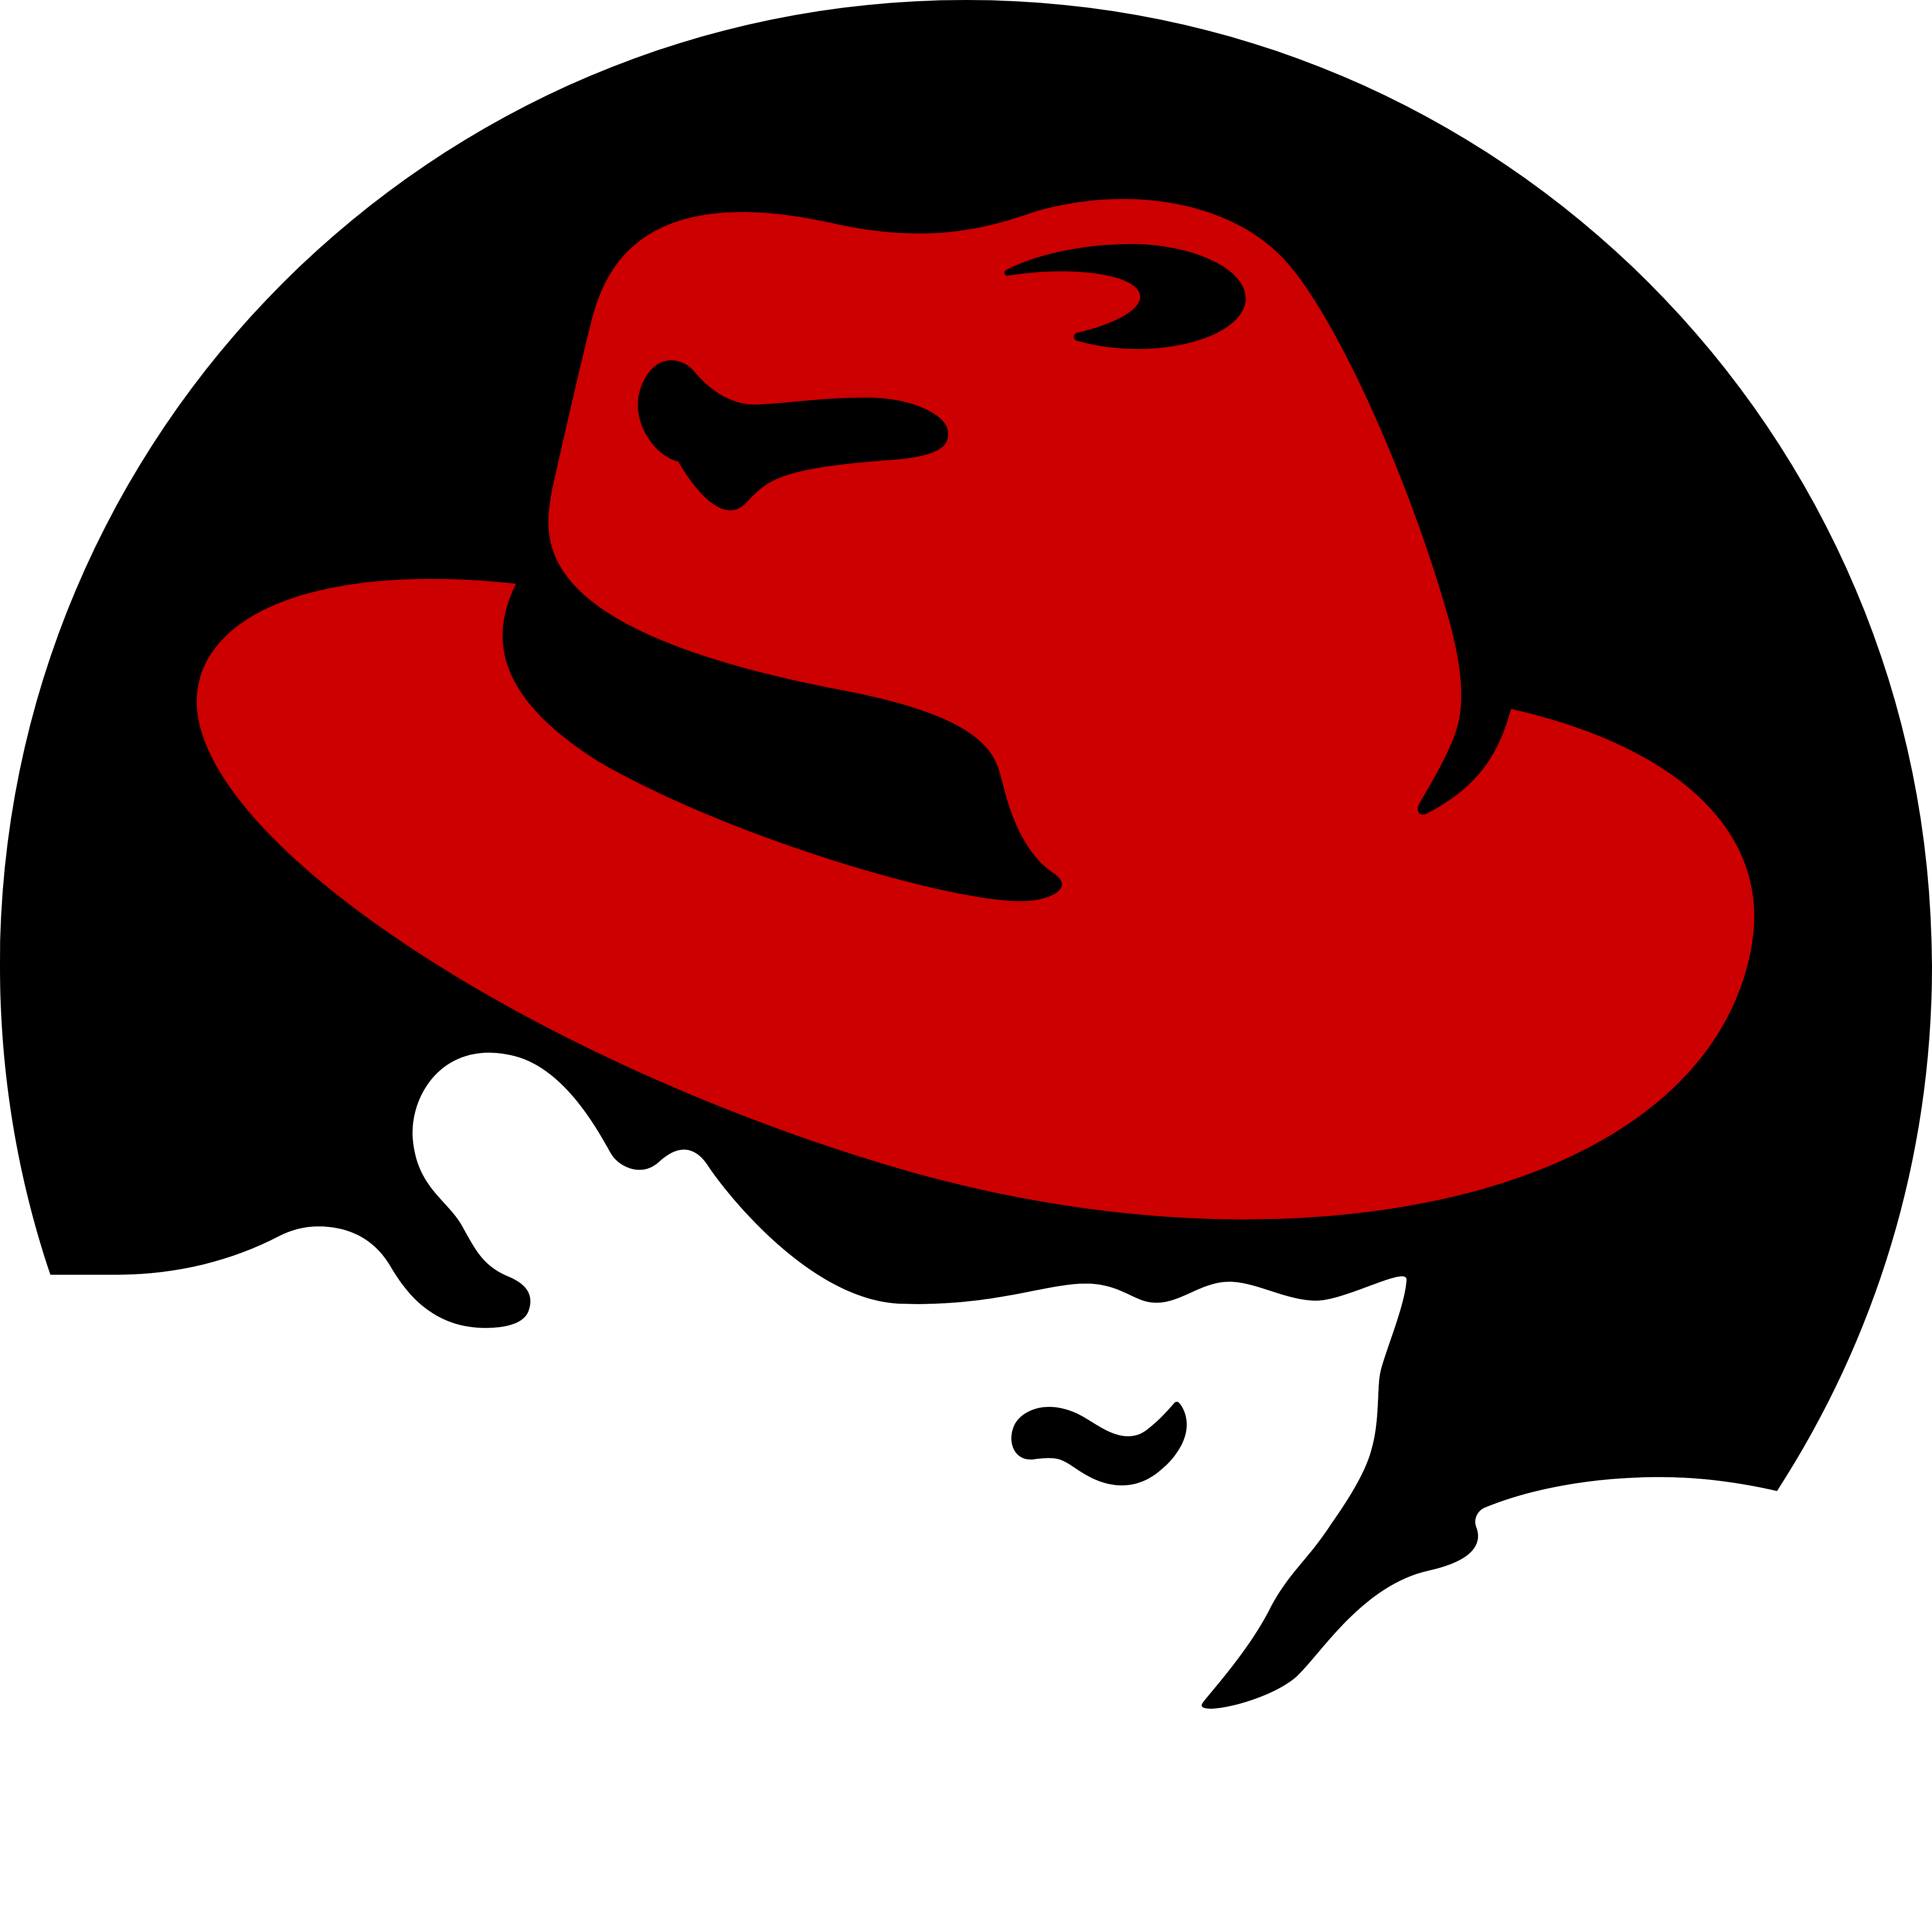 Red hat 7. Red hat лого. Ред хат линукс. Red hat Linux logo. Дистрибутивы Linux Red hat.